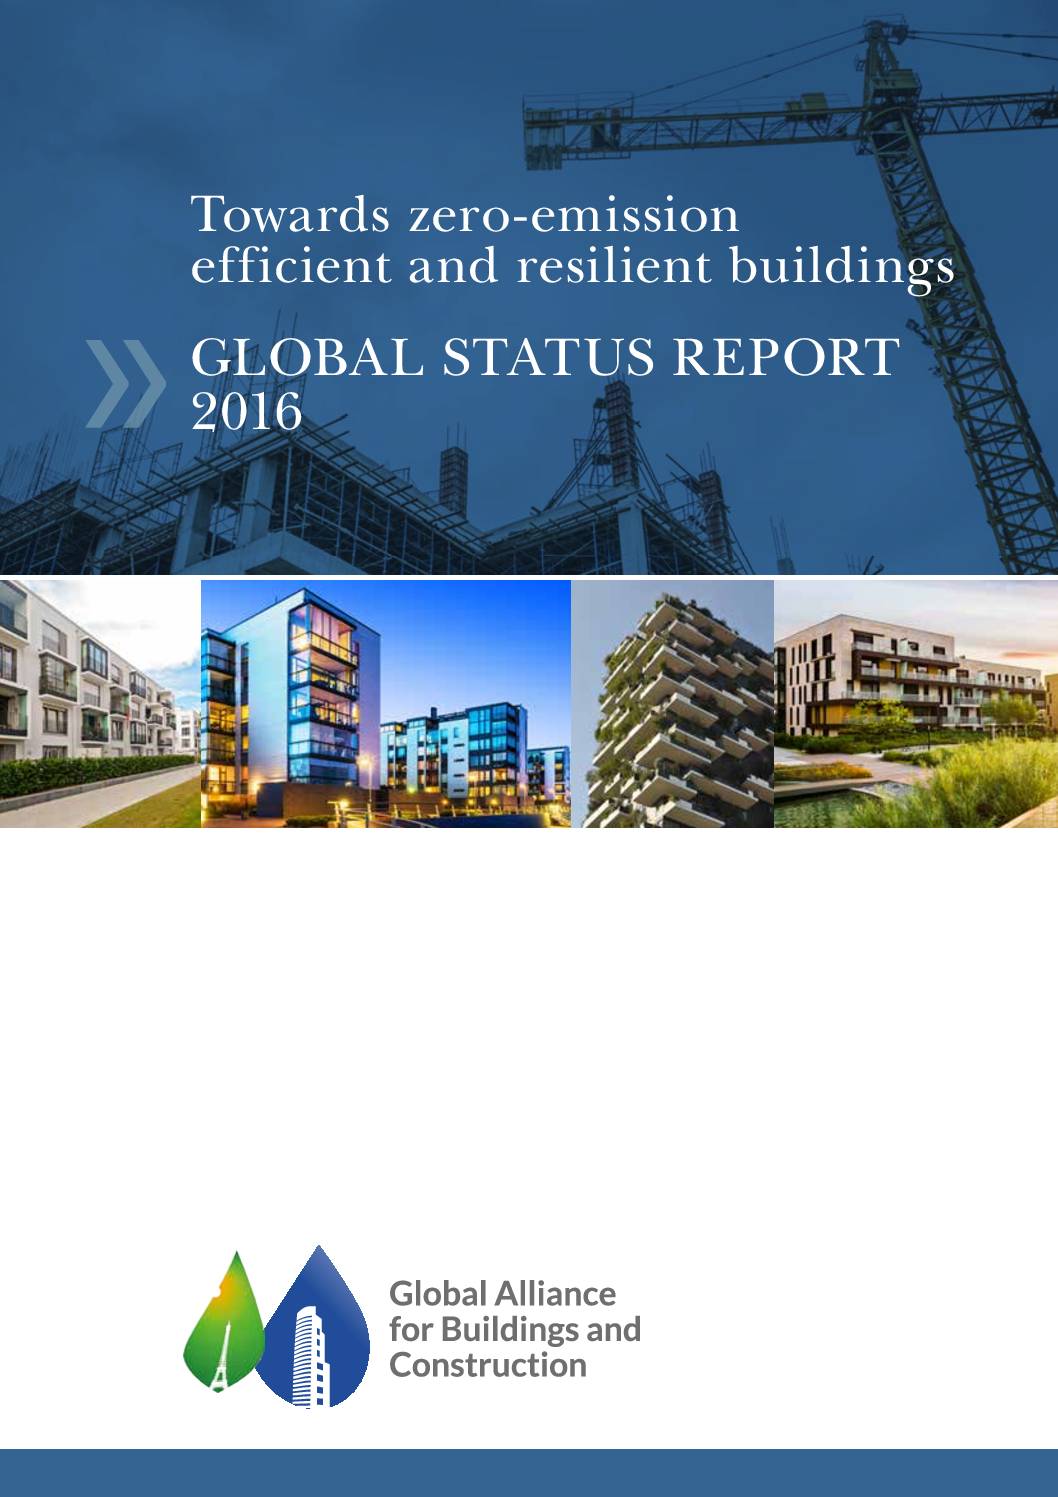 GLOBAL STATUS REPORT 2016: Towards zero-emission efficient and resilient buildings